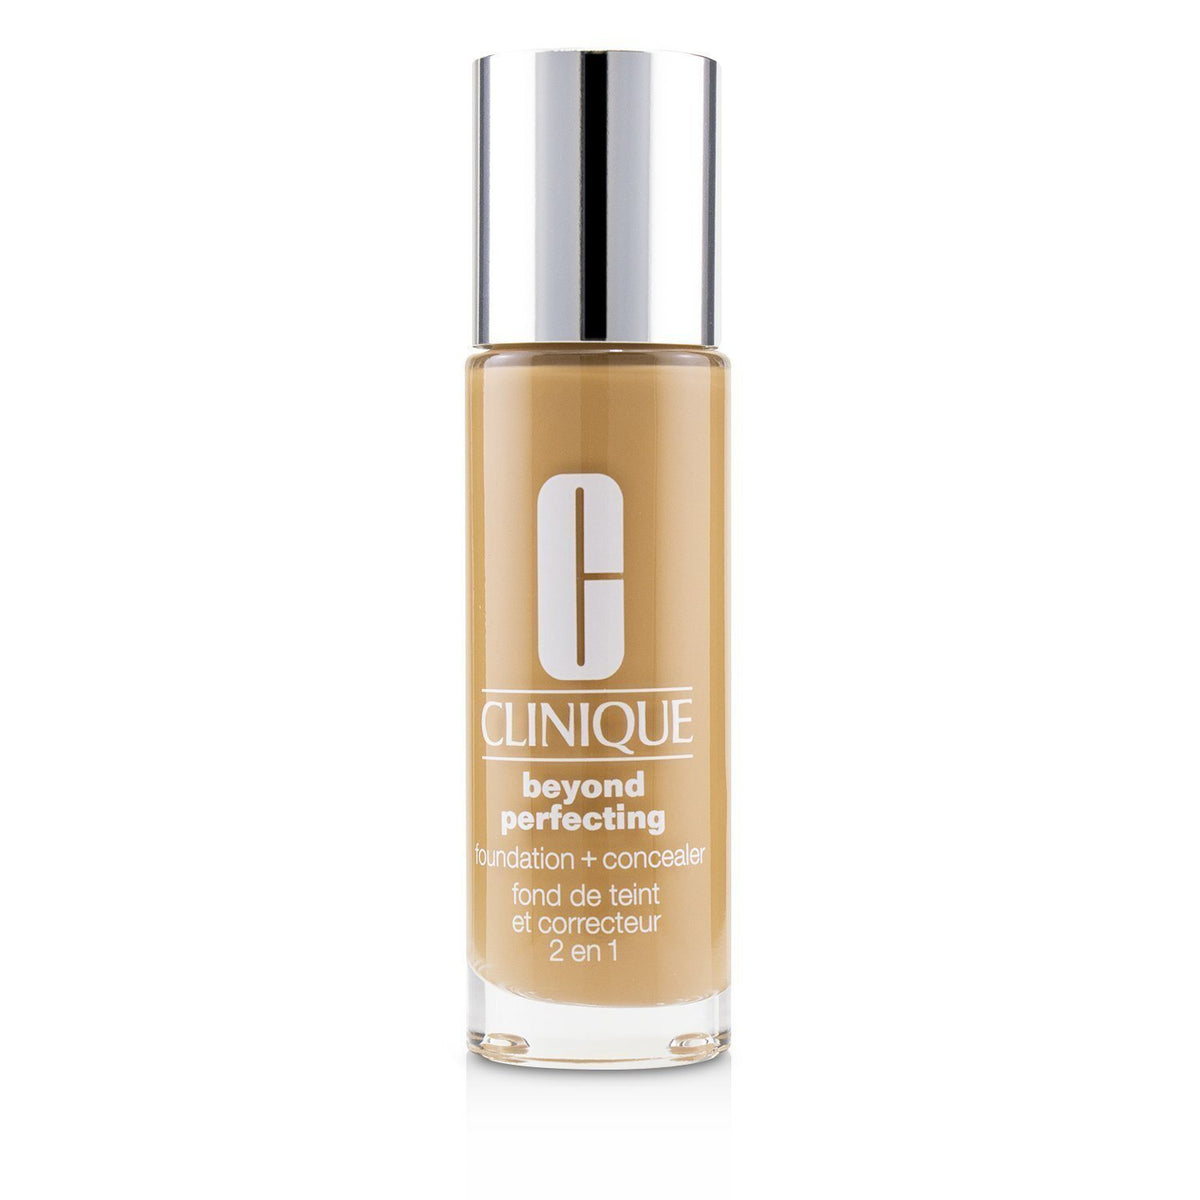 CLINIQUE - Beyond Perfecting Foundation & Concealer - # 18 Sand